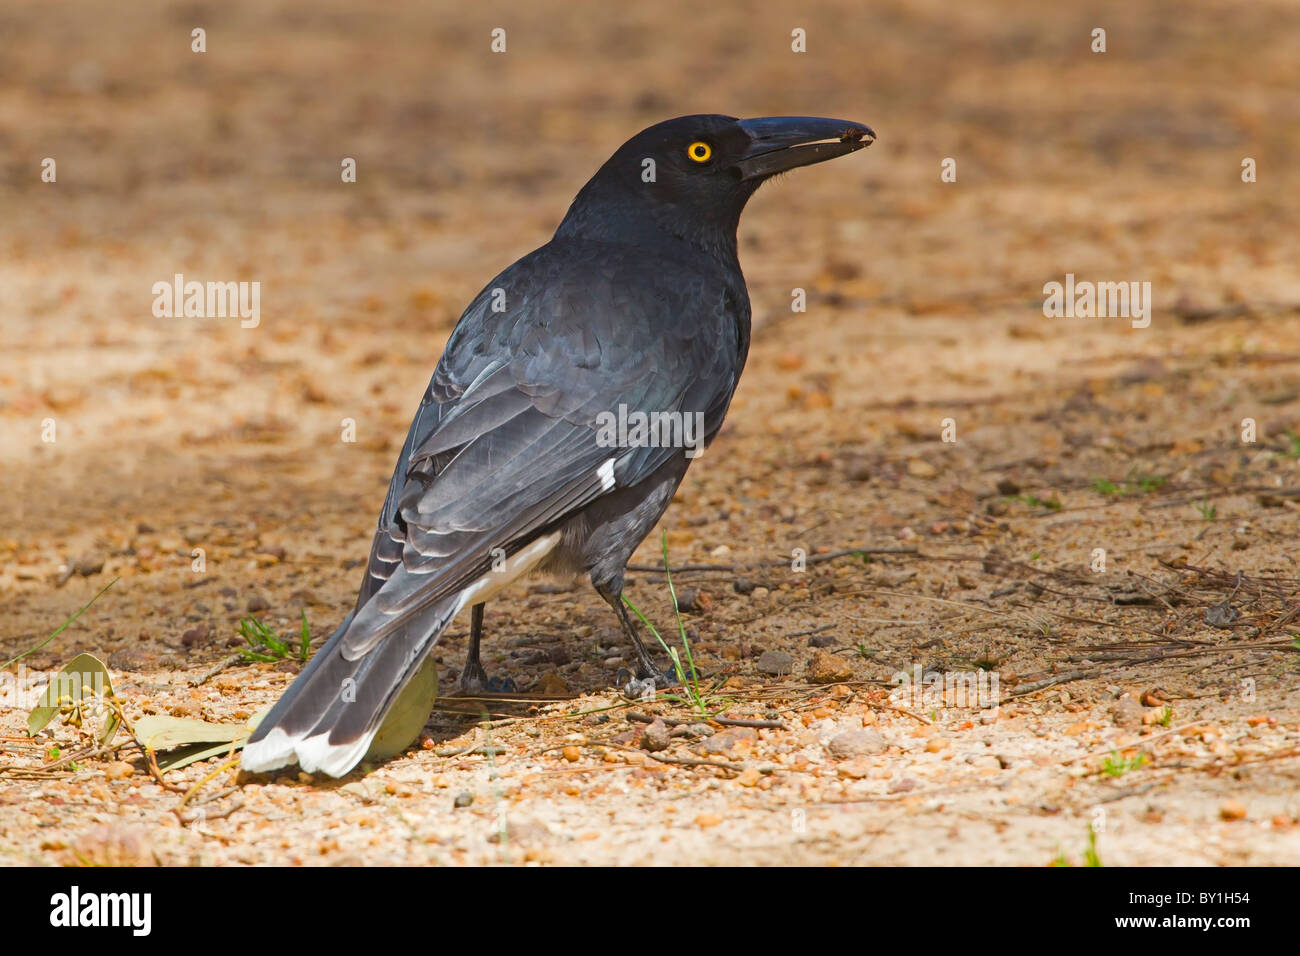 GREY CURRAWONG ON THE GROUND FEEDING ON BEETLES Stock Photo